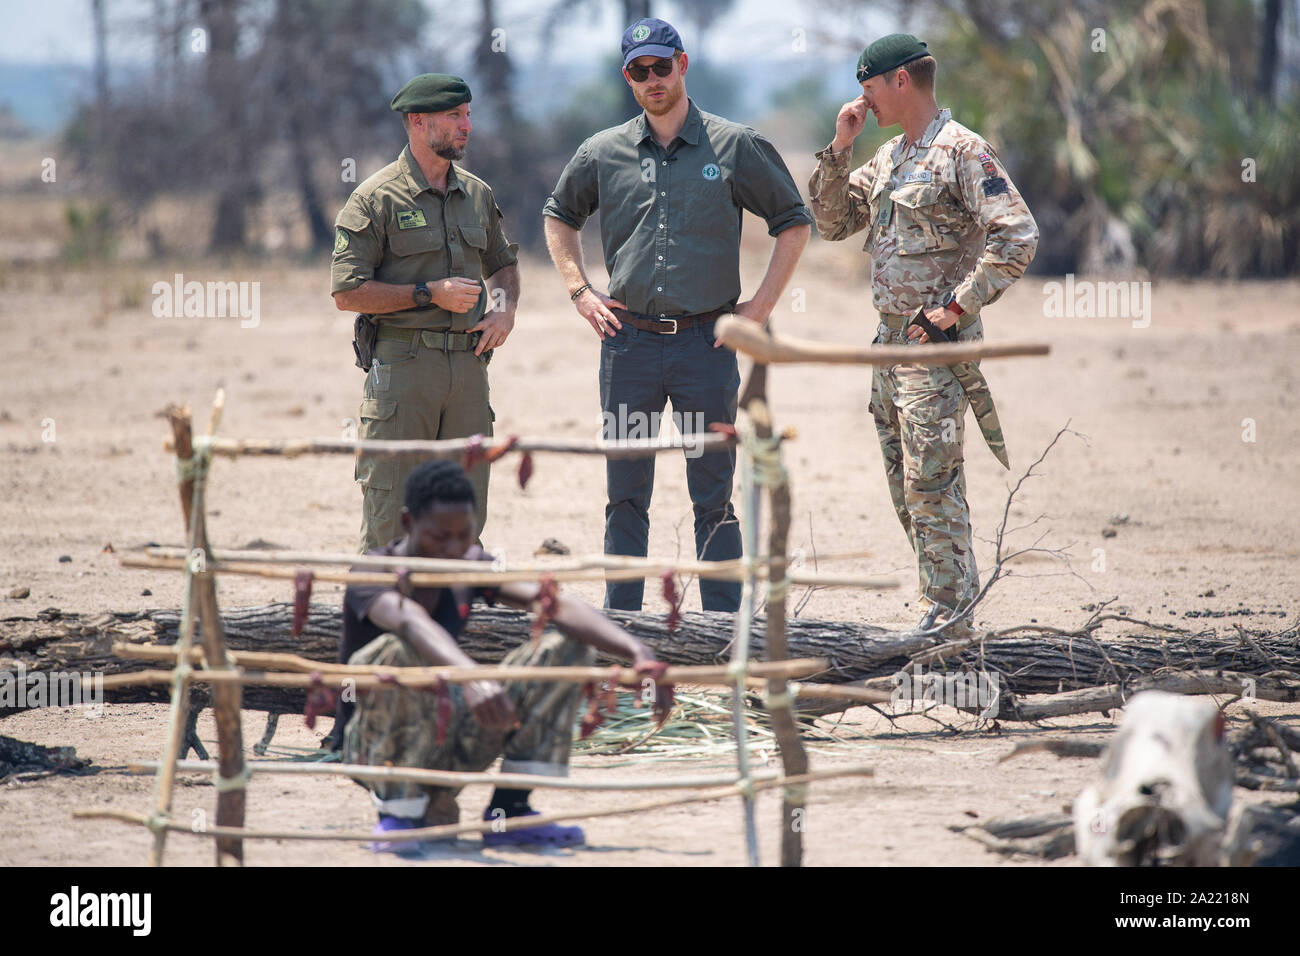 The Duke of Sussex (centre) views a recreation of a poacher's camp, part of an an anti-poaching demonstration exercise conducted jointly by local rangers and UK military, at Liwonde National Park, Malawi, on day eight of the royal tour of Africa. Stock Photo